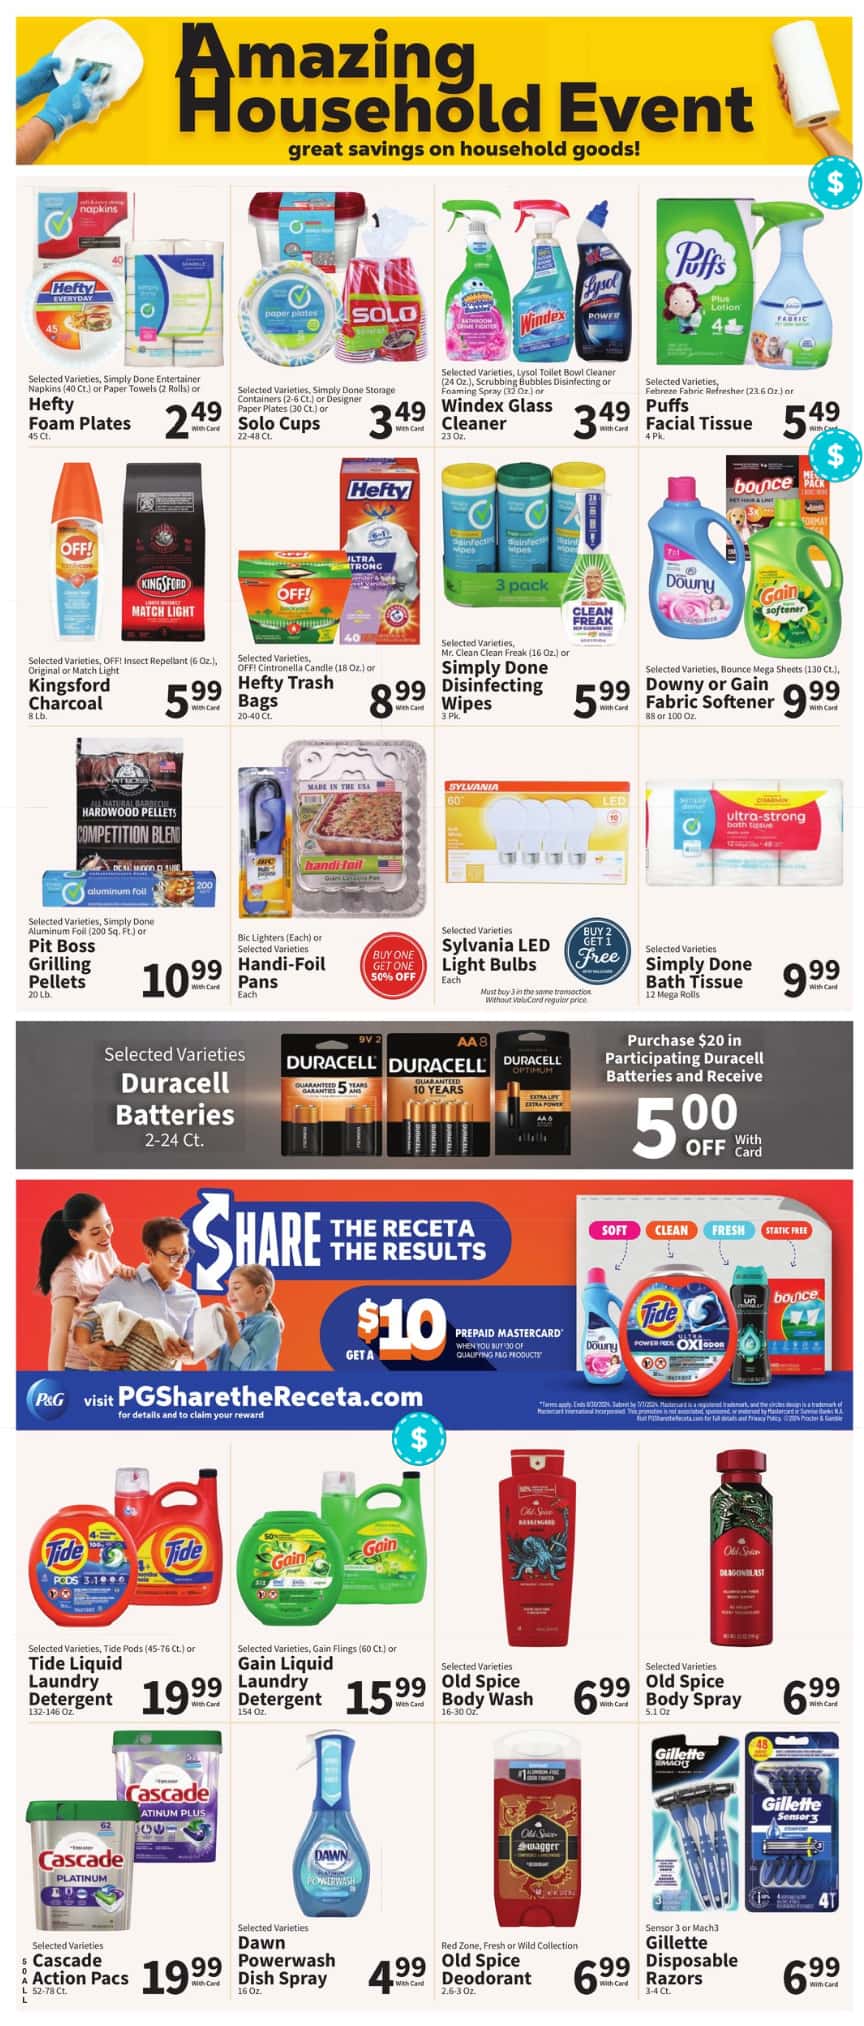 Food City Weekly Ad July 2024 Weekly Sales, Deals, Discounts and Digital Coupons.